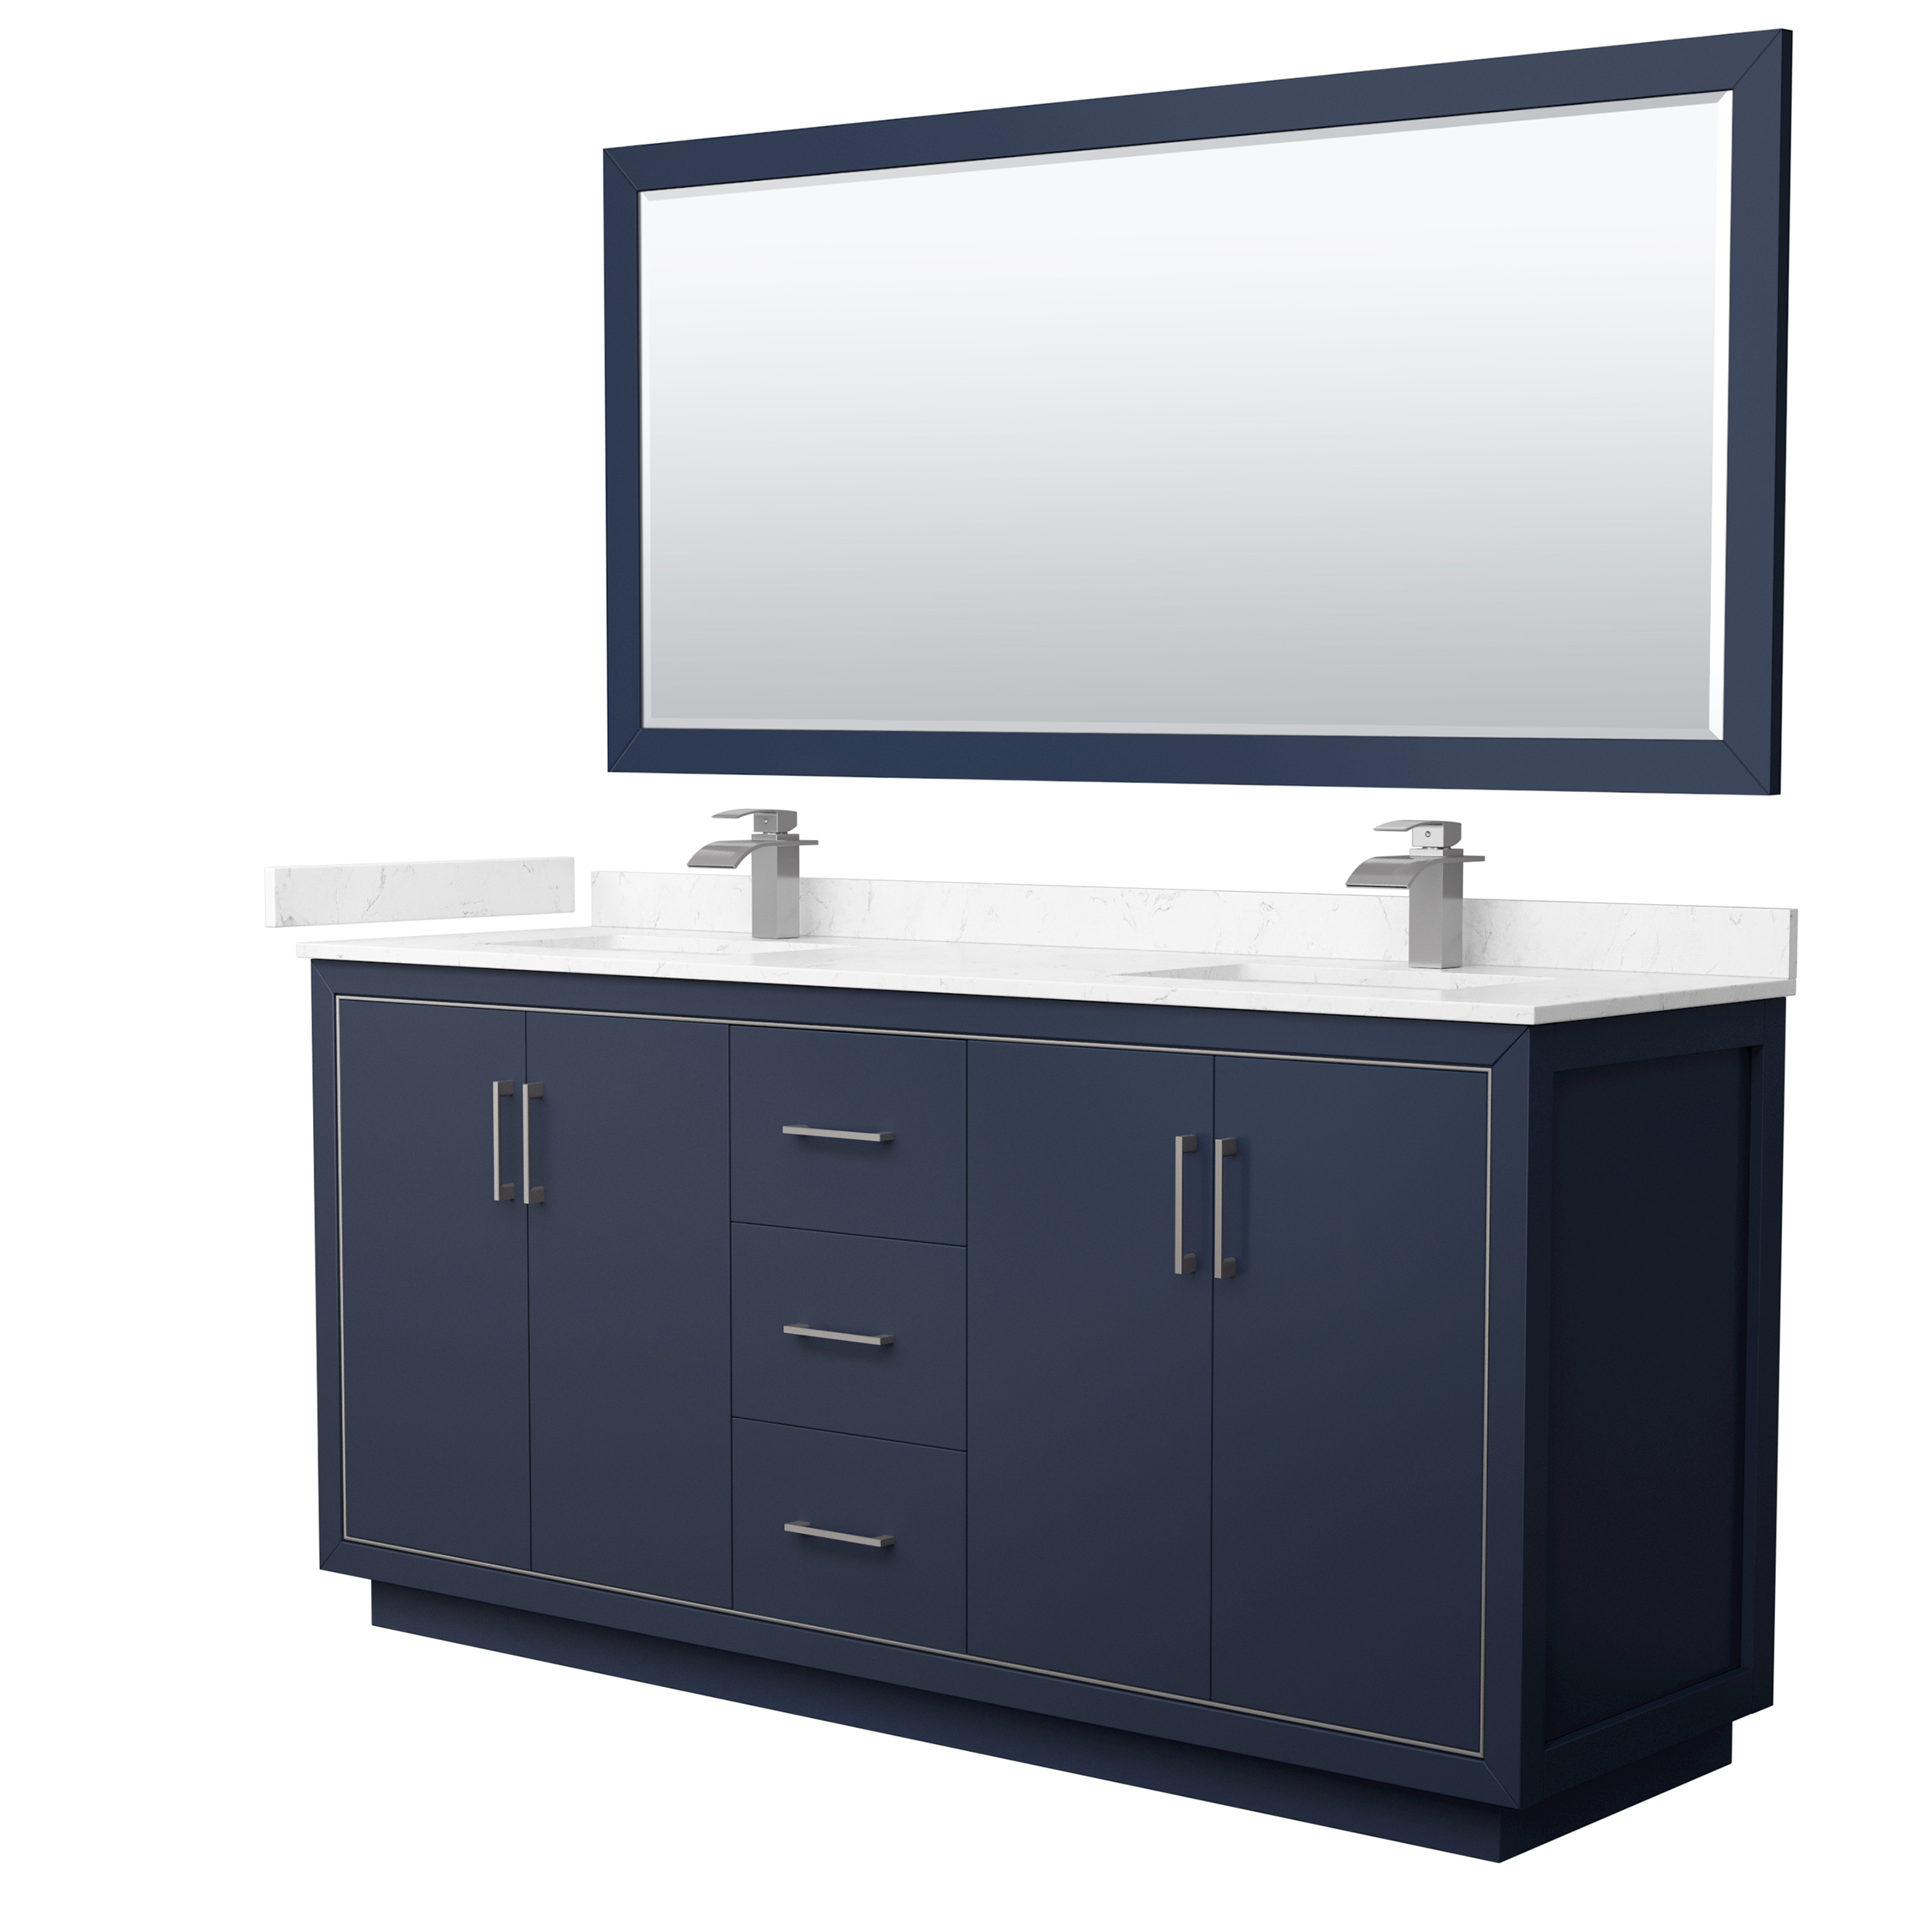 72" Double Bathroom Vanity with 4 Color Options, 3 Countertop Options, 3 Hardware Options and Mirror Option